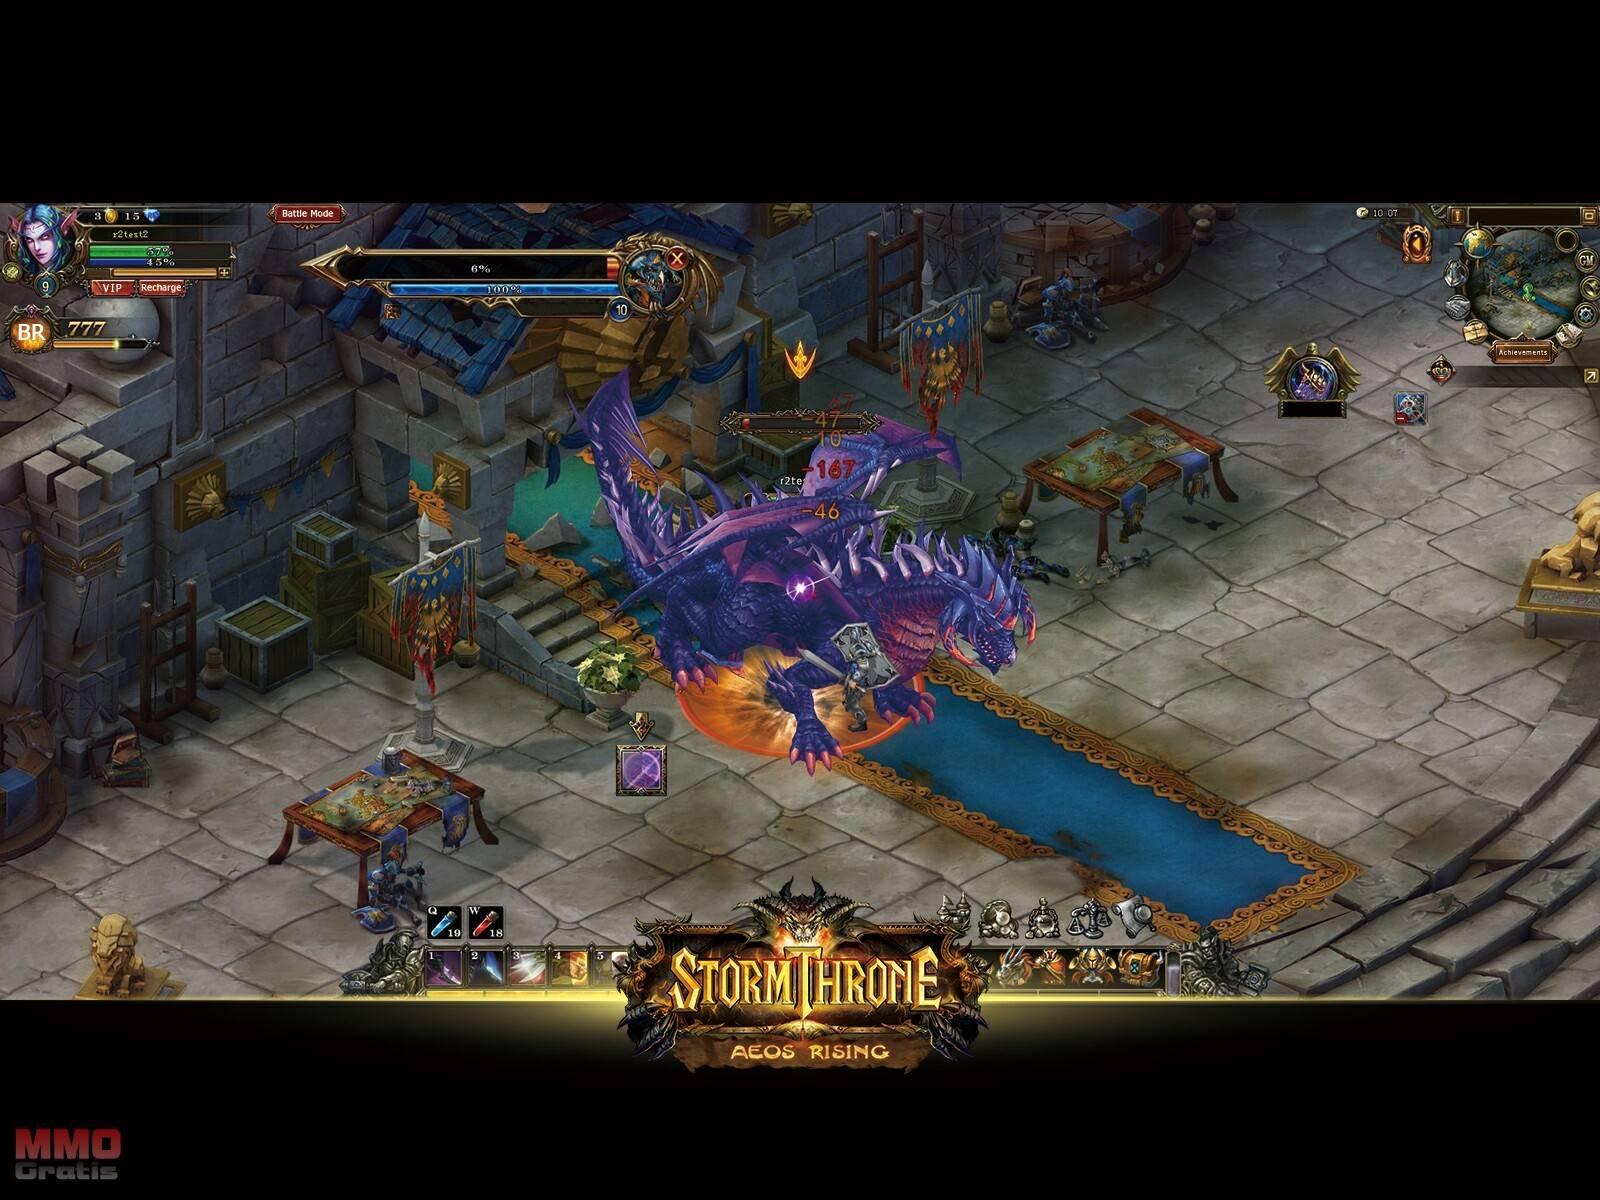 browser mmorpg - no download Archives - Herodonia - Mobile Online RPG Game